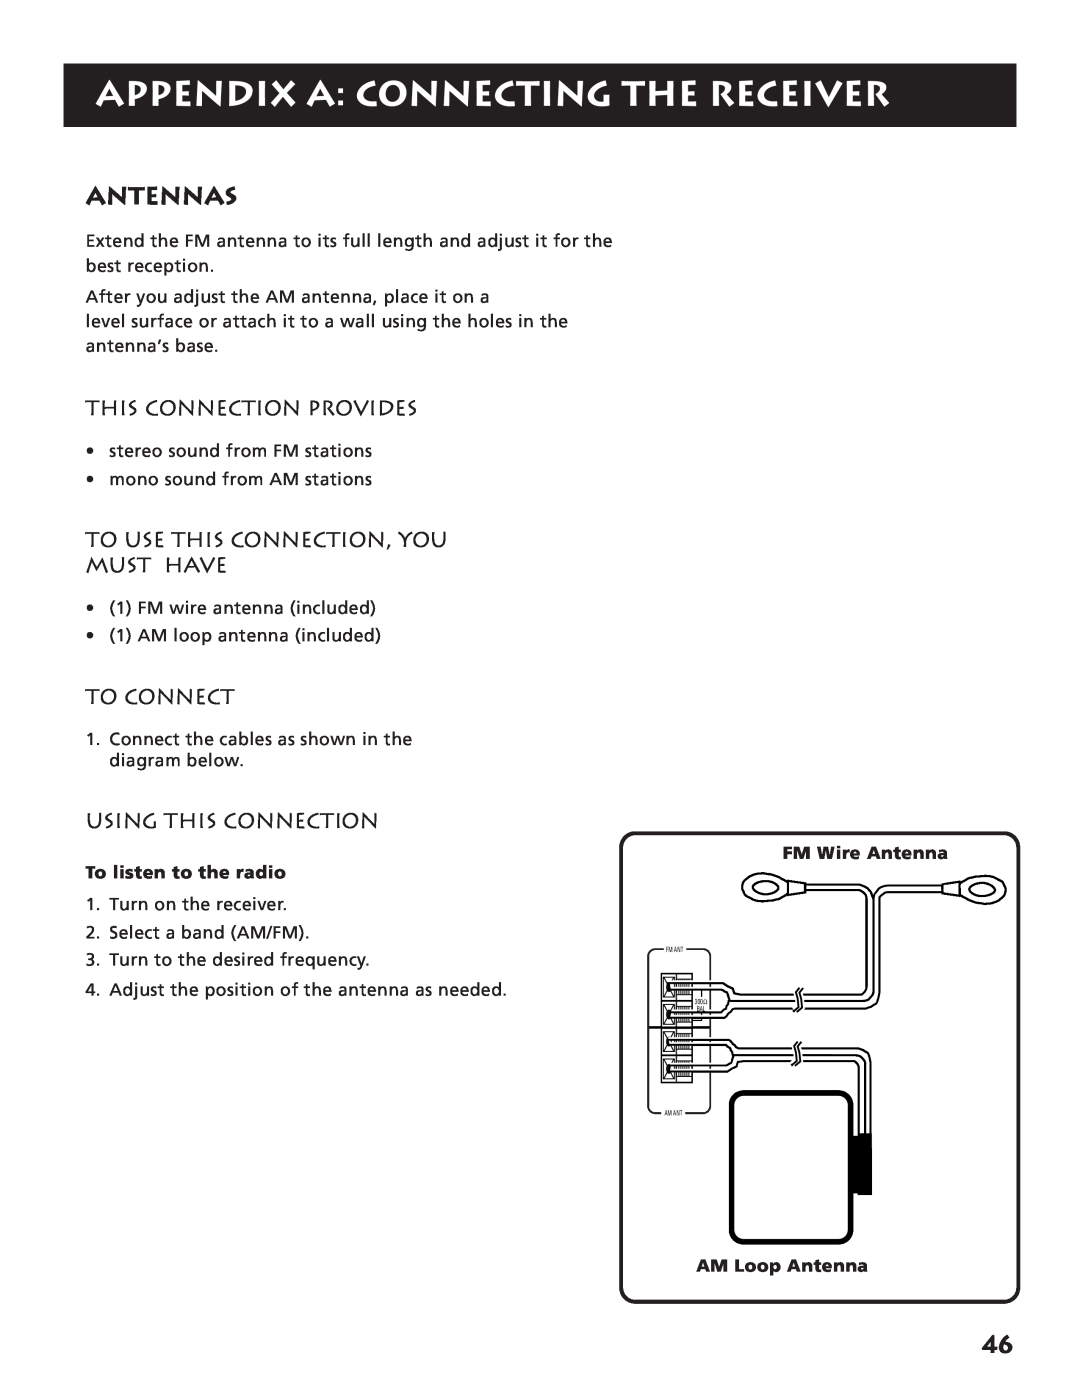 RCA RV3693 manual Antennas, Appendix A Connecting The Receiver, To listen to the radio, FM Wire Antenna, AM Loop Antenna 